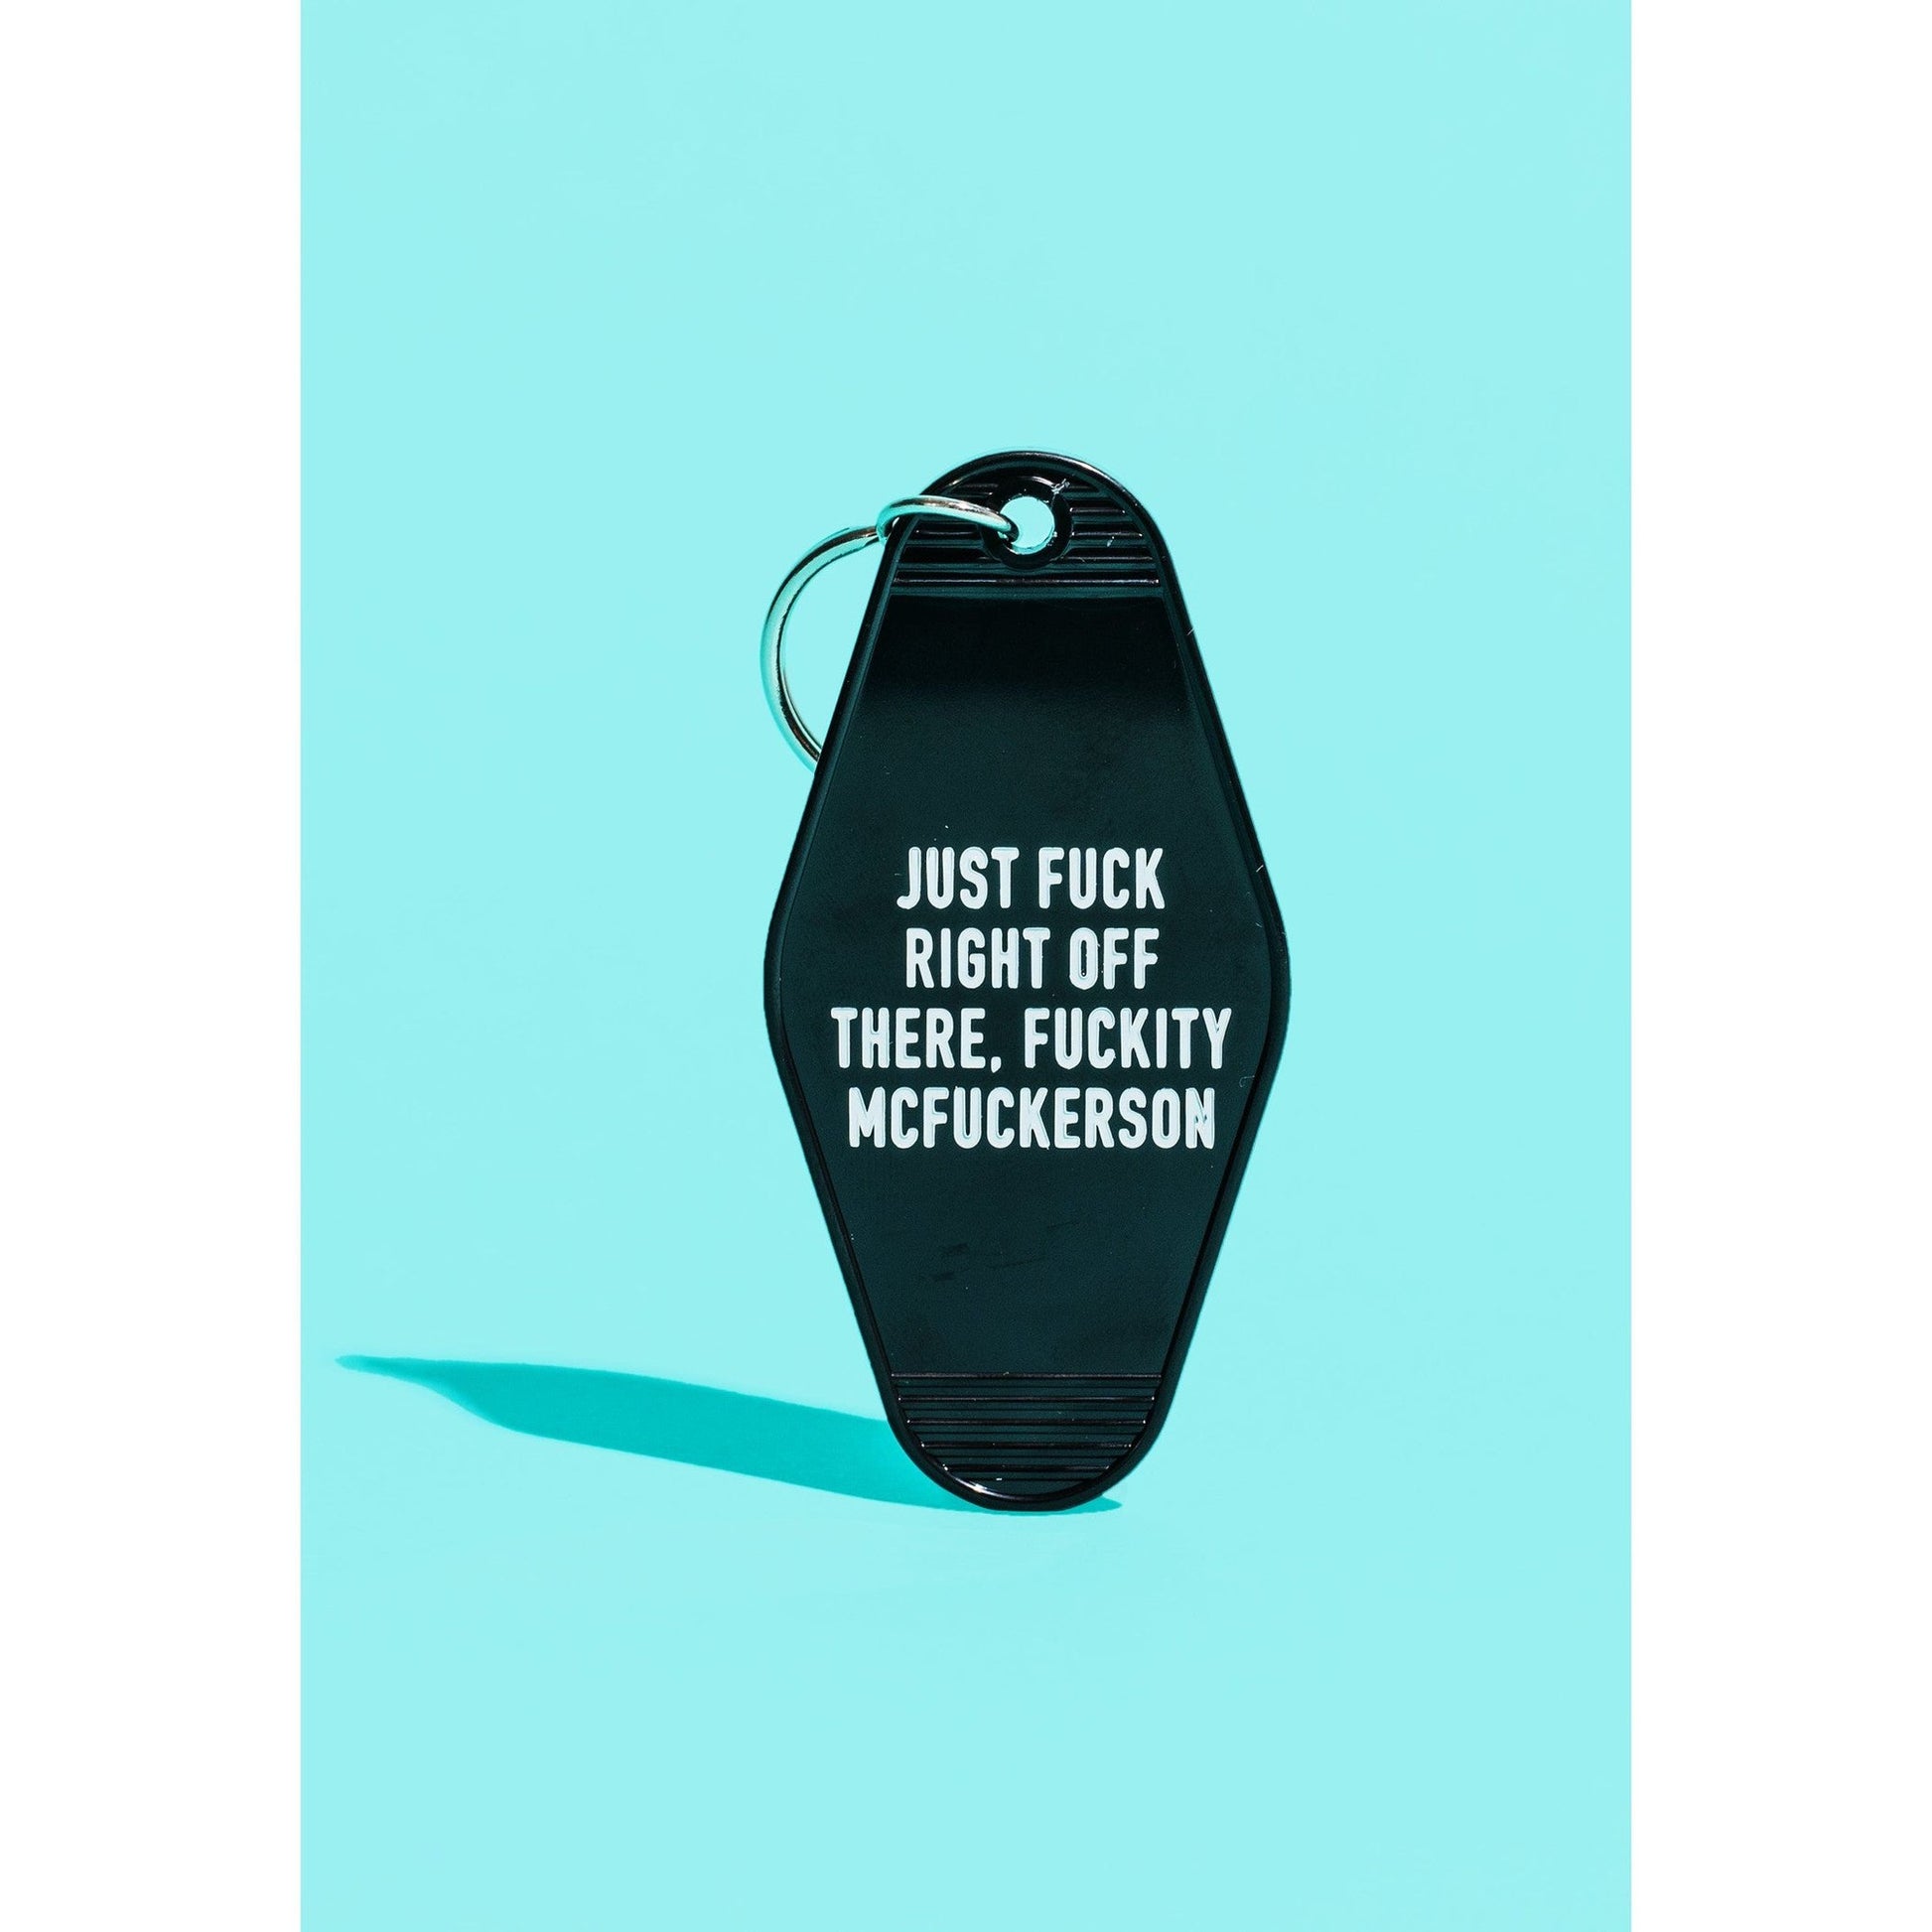 Just Fuck Right Off There, Fuckity McFuckerson Black Motel Style Keychain